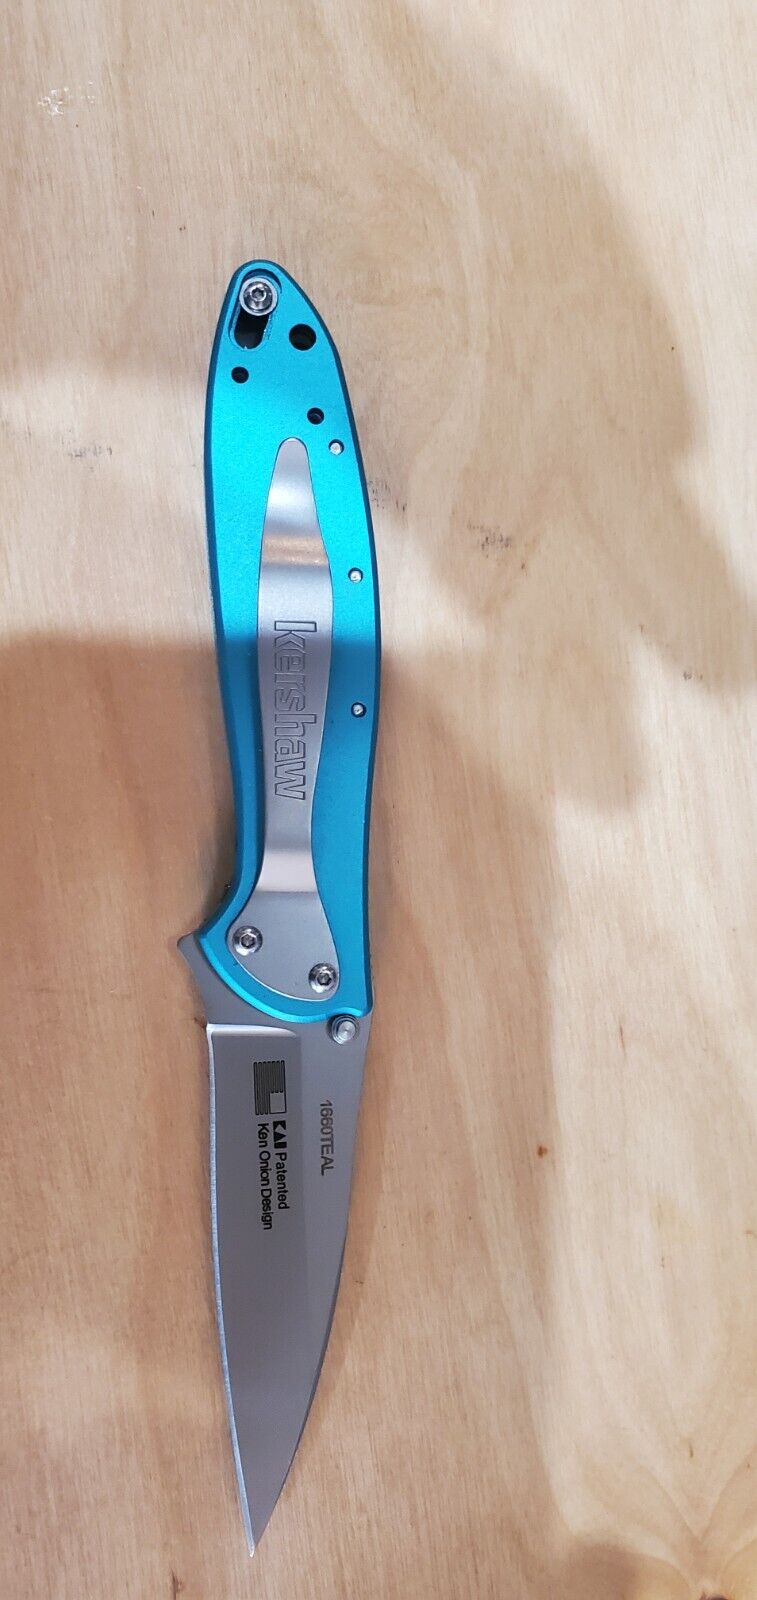 Kershaw Teal leek 1660 out of box special